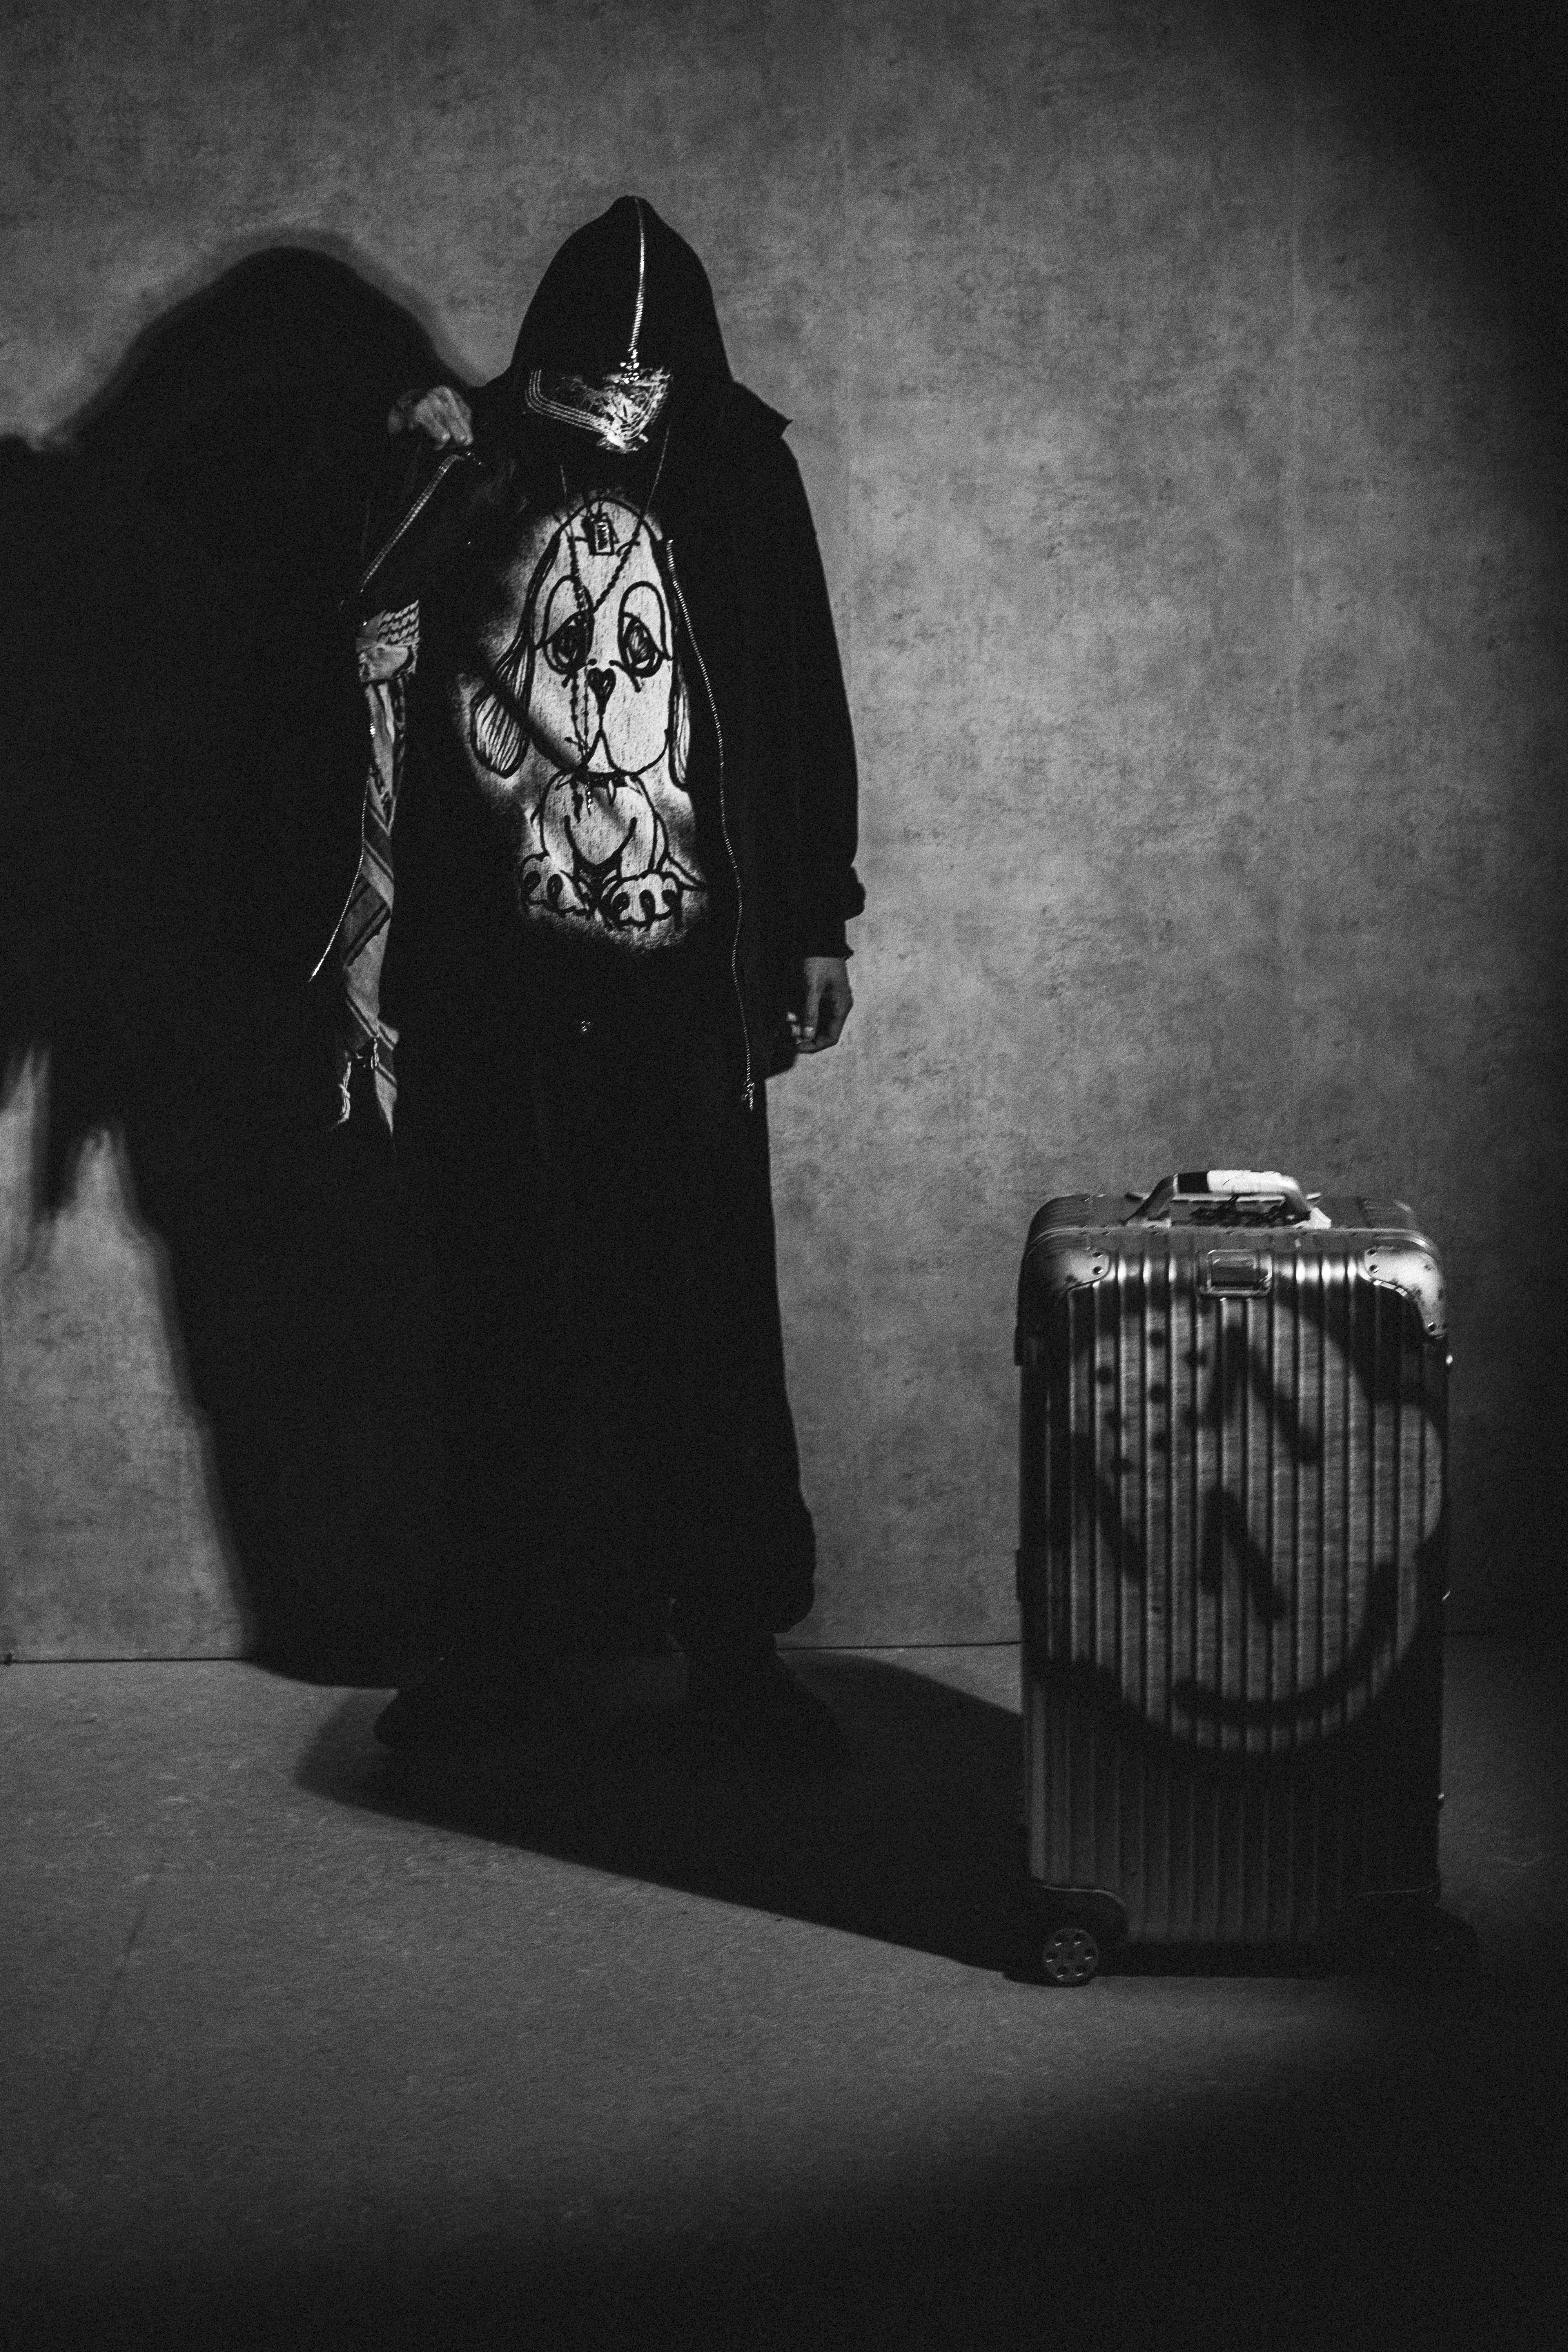 A person stands in a dimly lit space, wearing a hoodie and a mask, partially obscured by shadows, next to a suitcase with a peace symbol on it